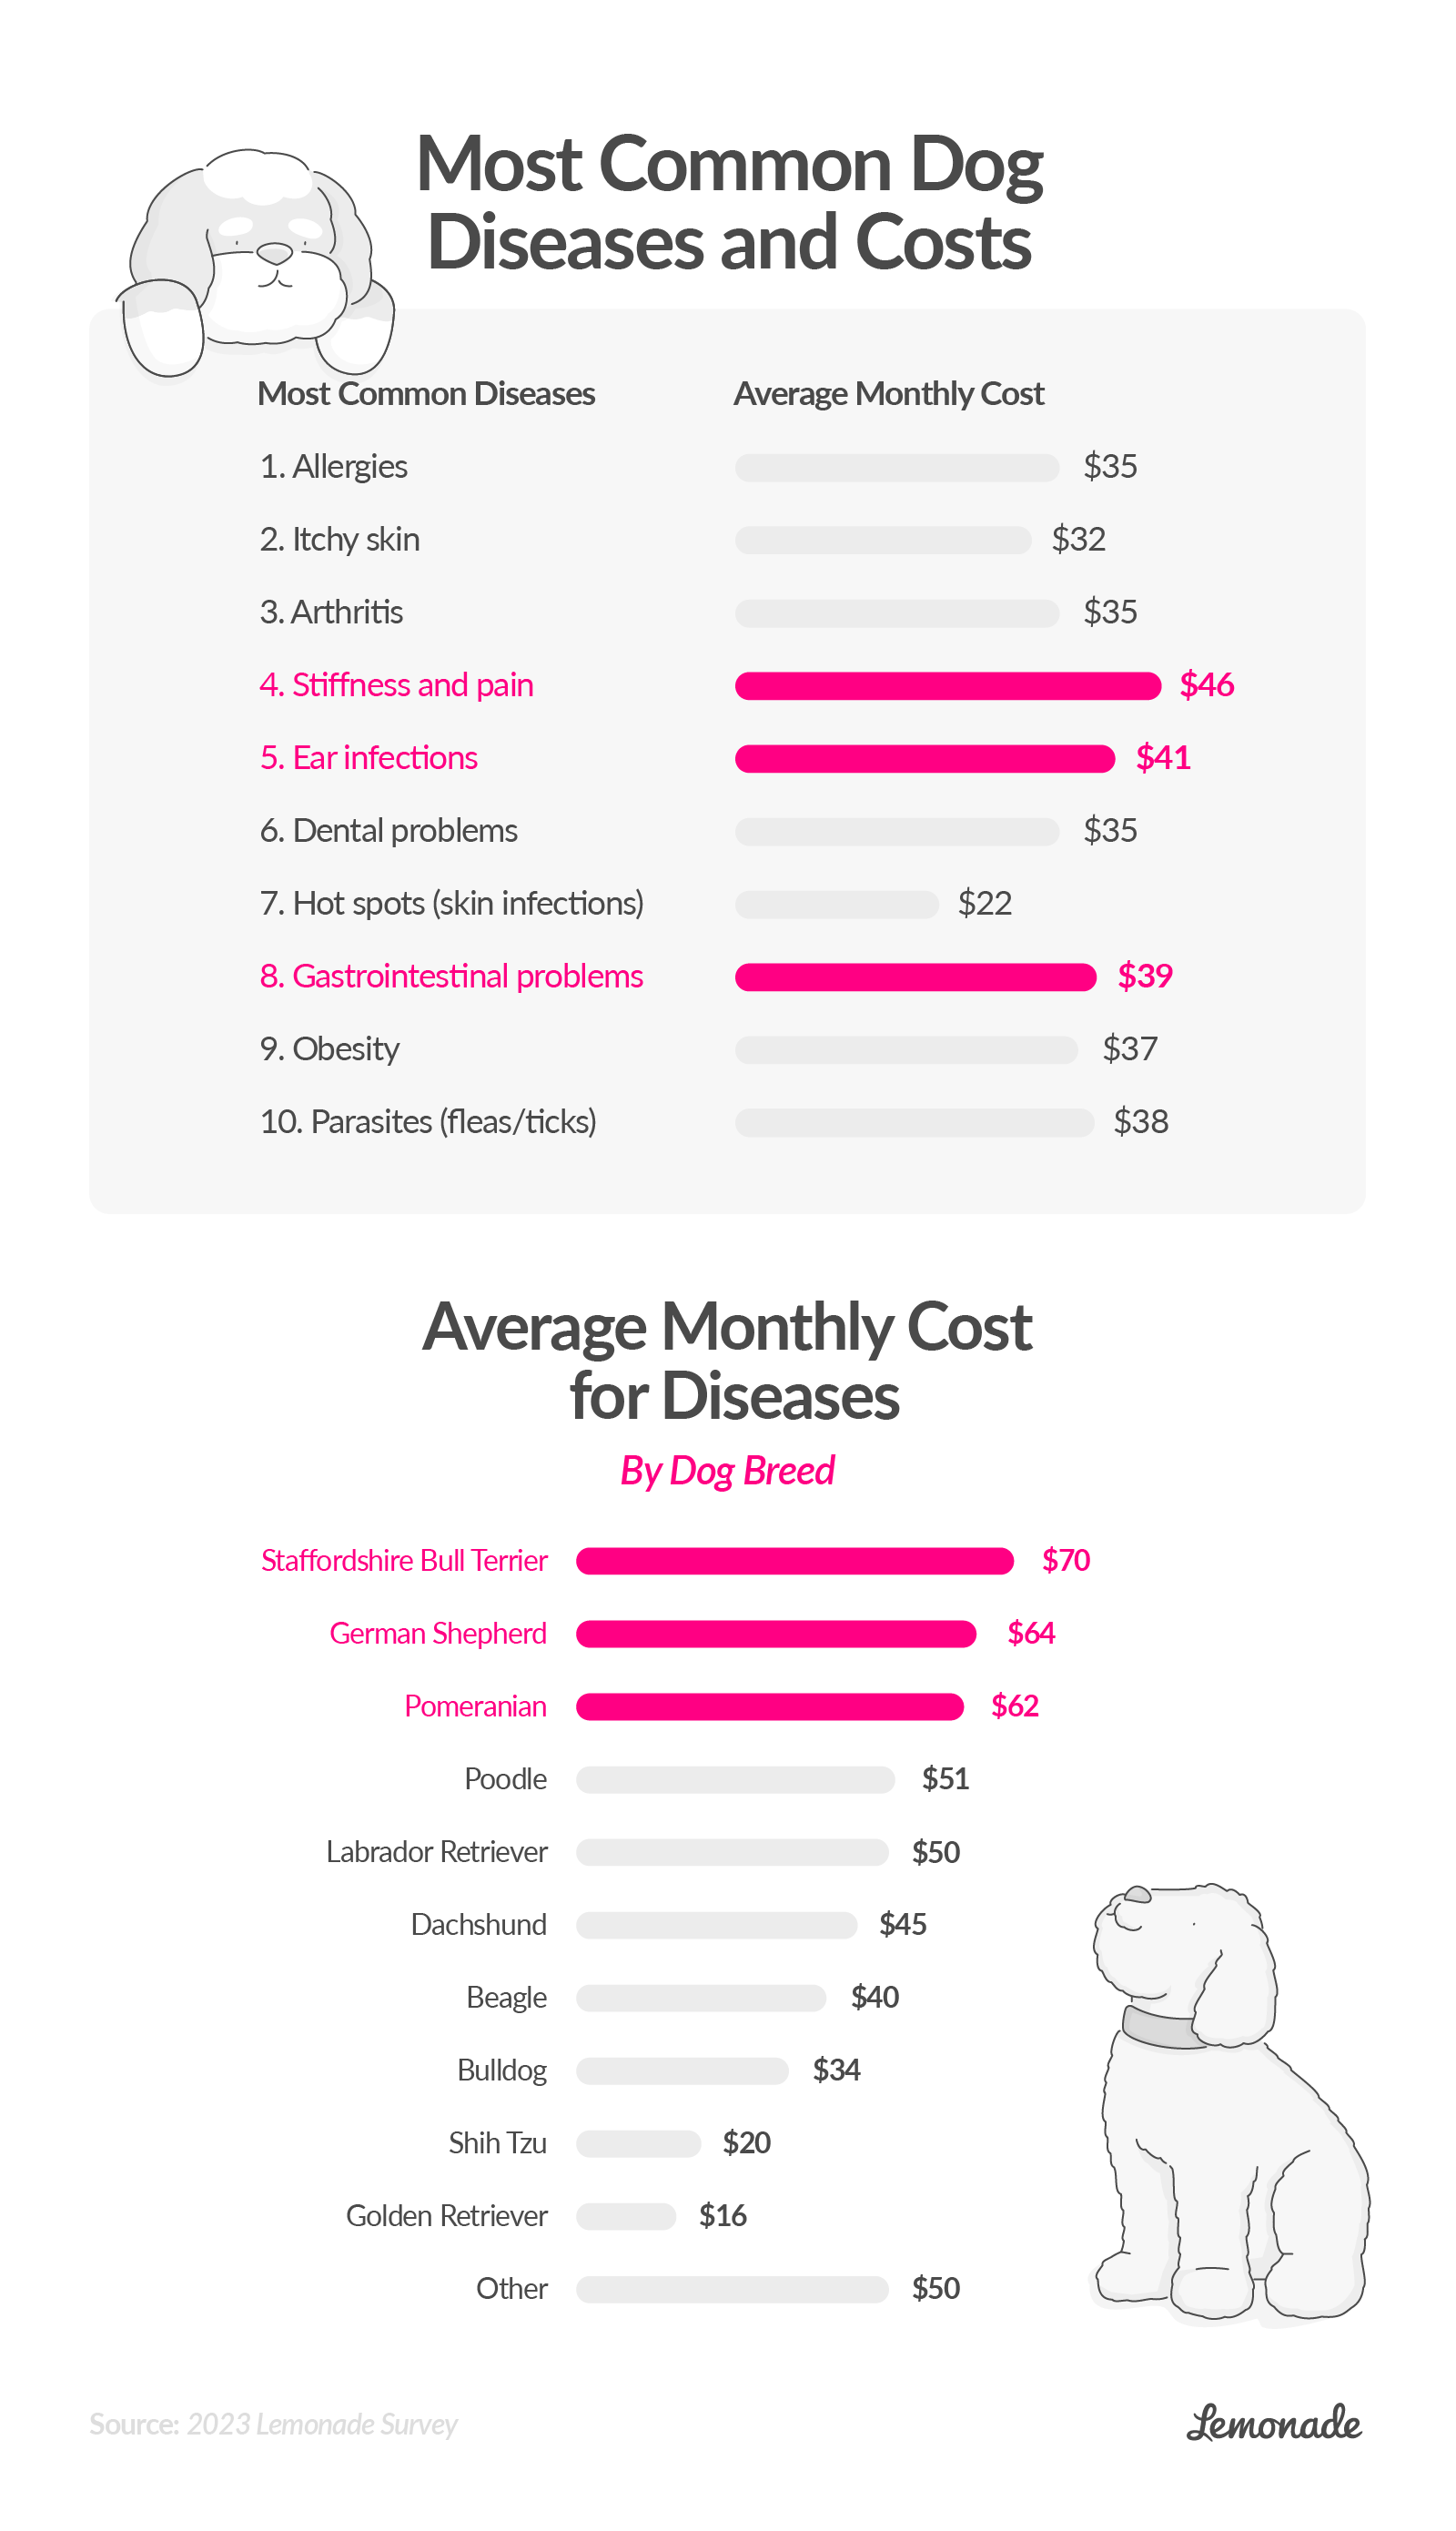 Most common dog diseases and costs